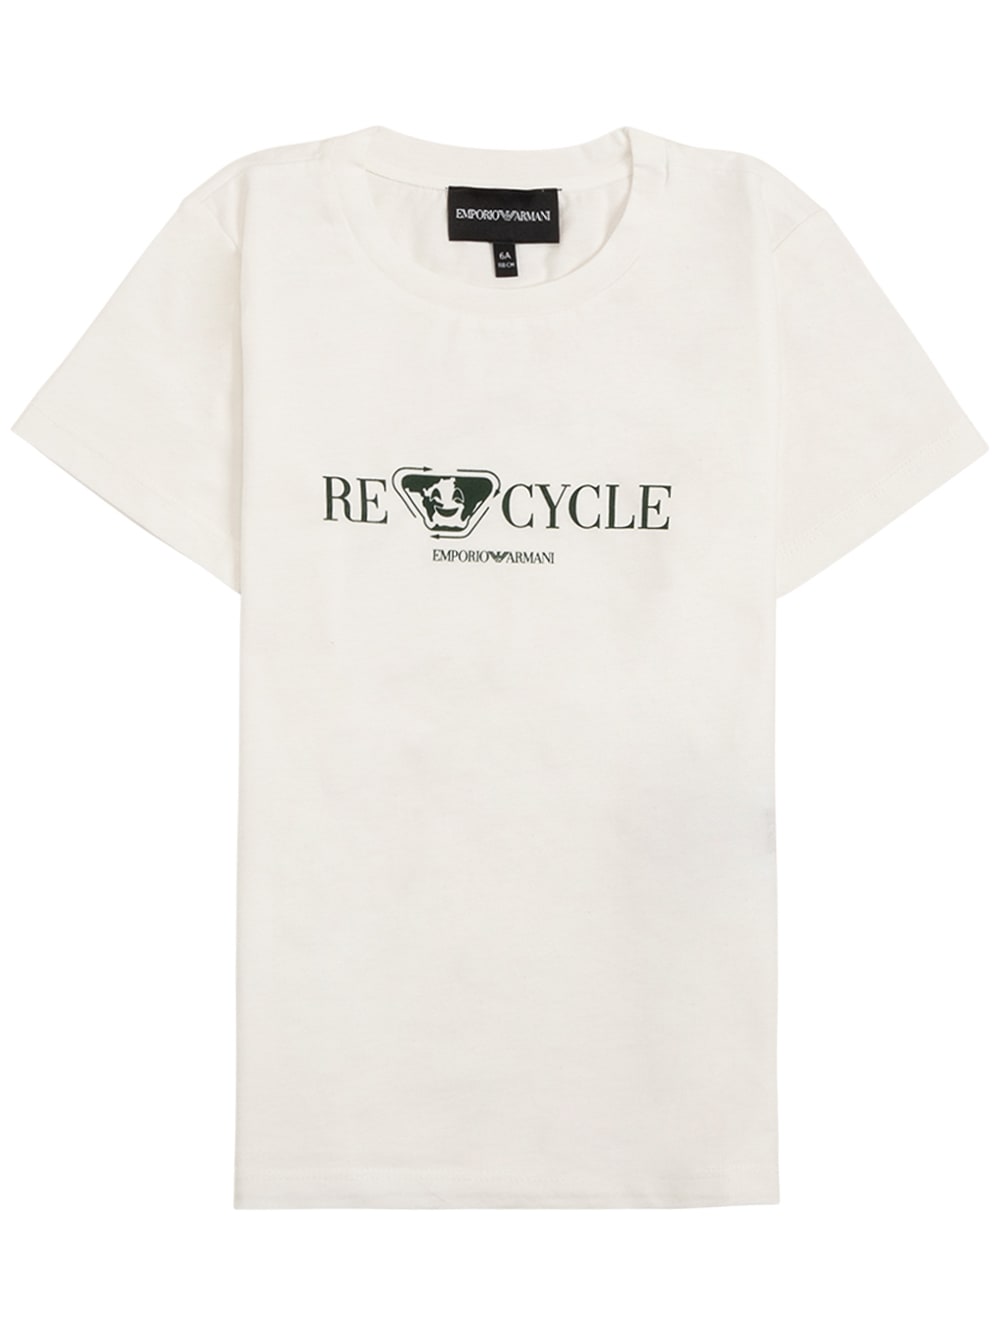 Emporio Armani White T-shirt In Recycled Cotton With Print